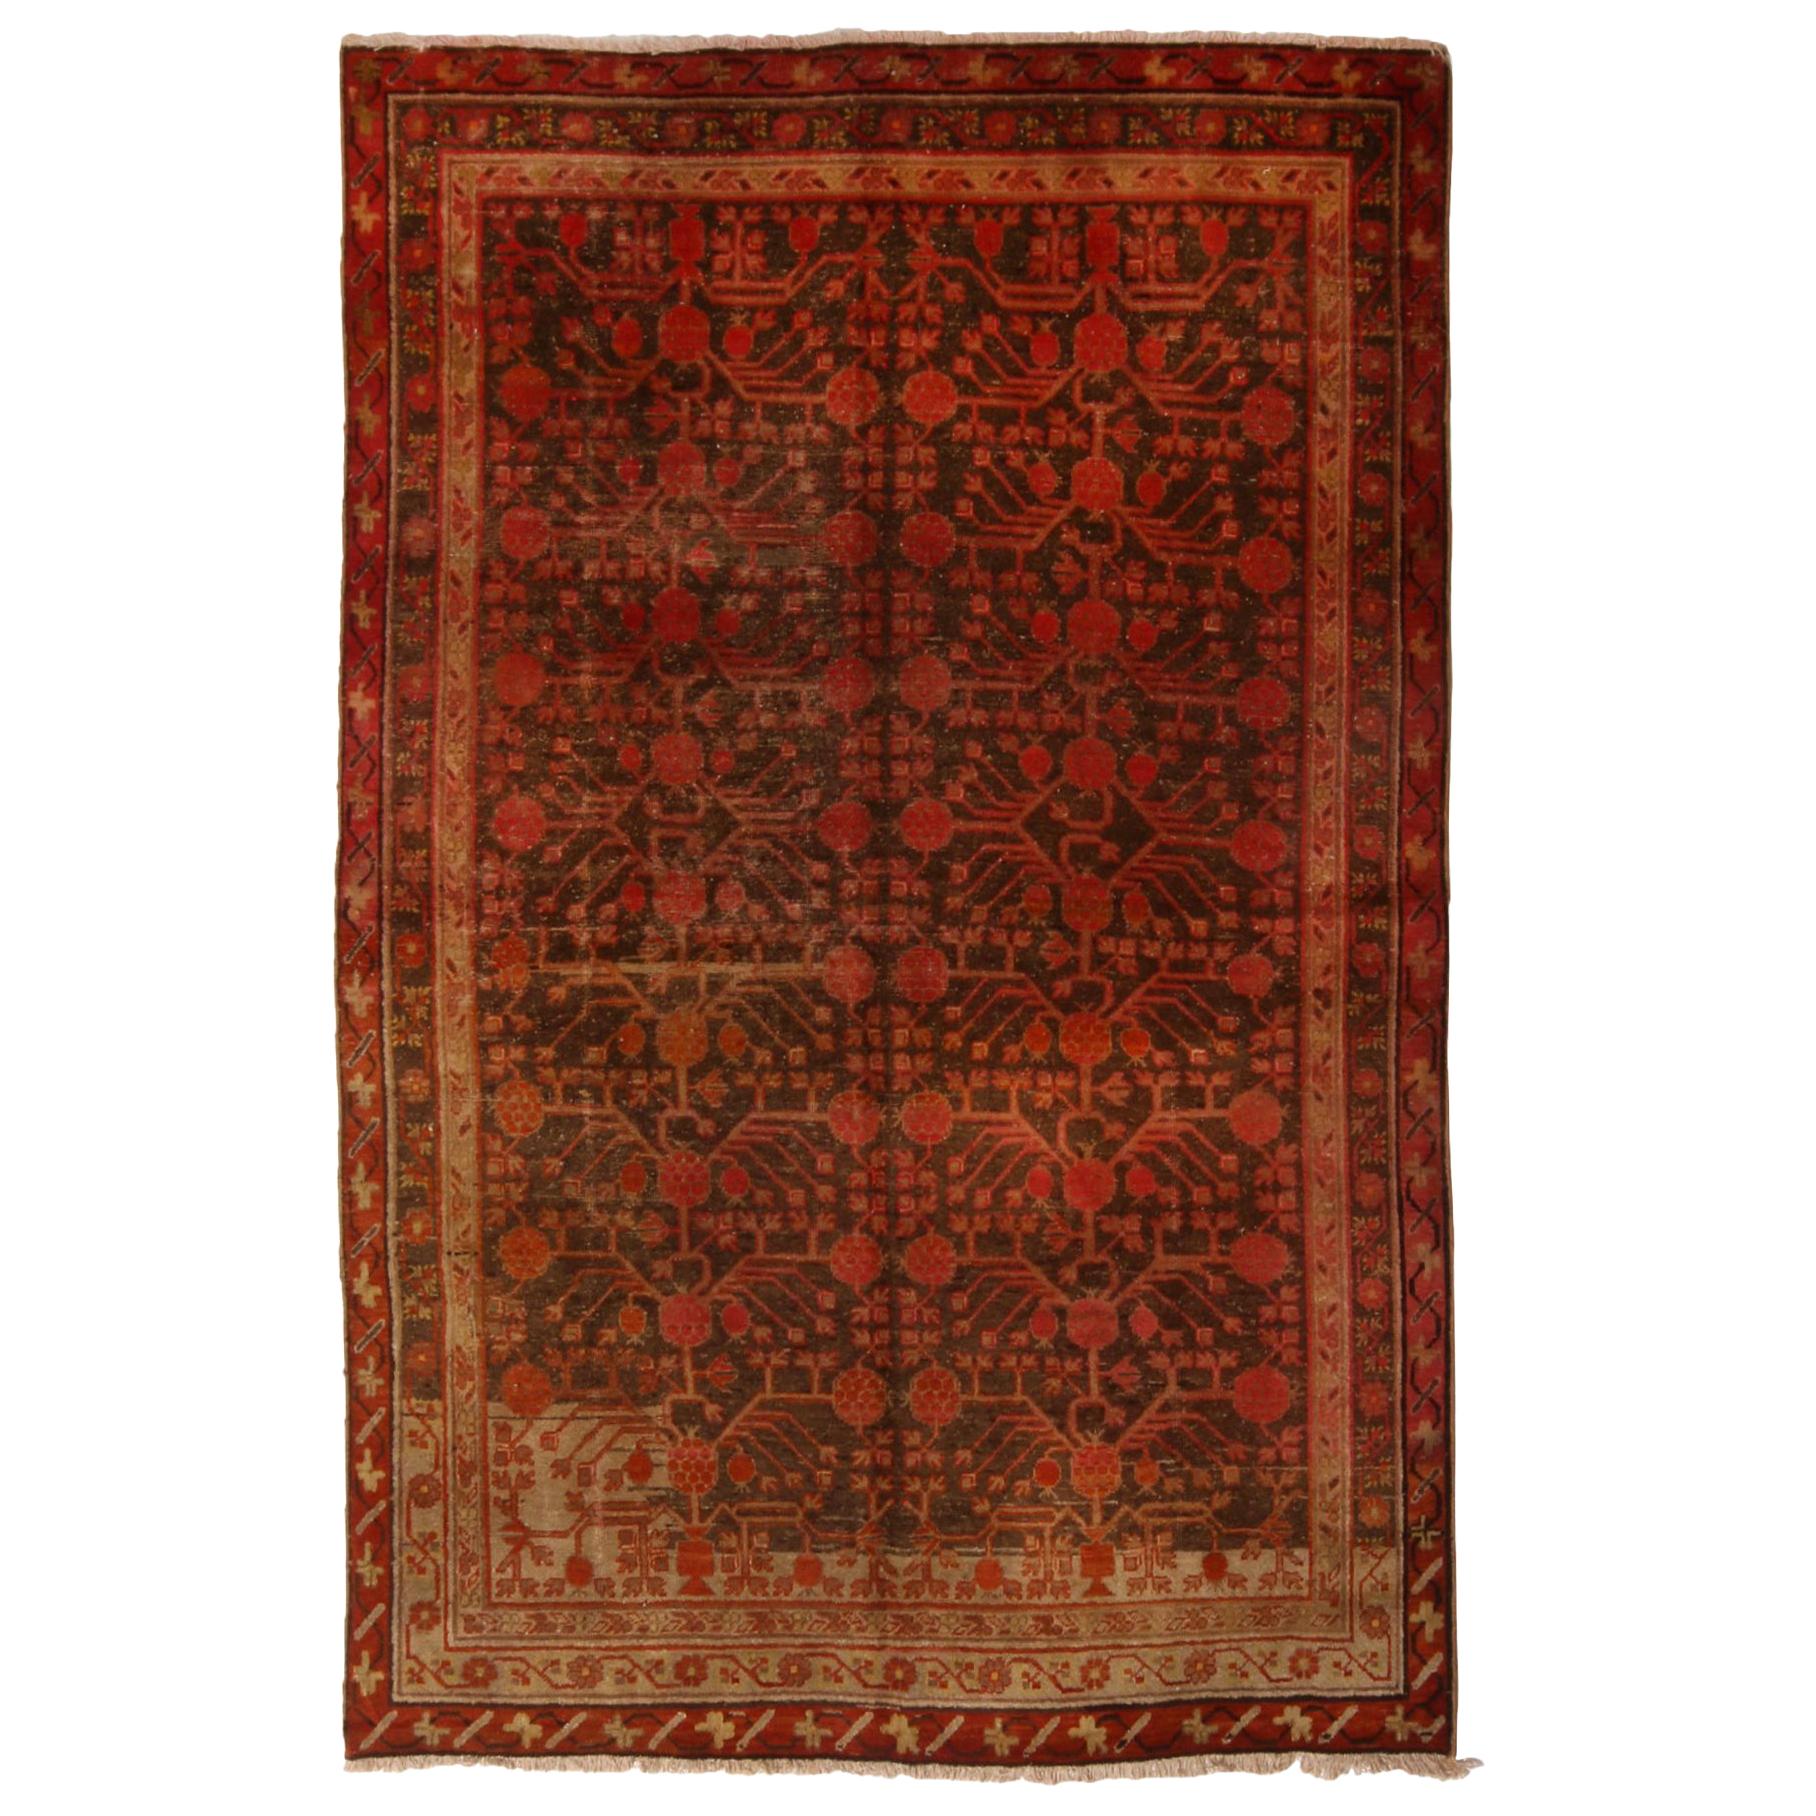 Antique Khotan Transitional Red and Brown Wool Rug by Rug & Kilim